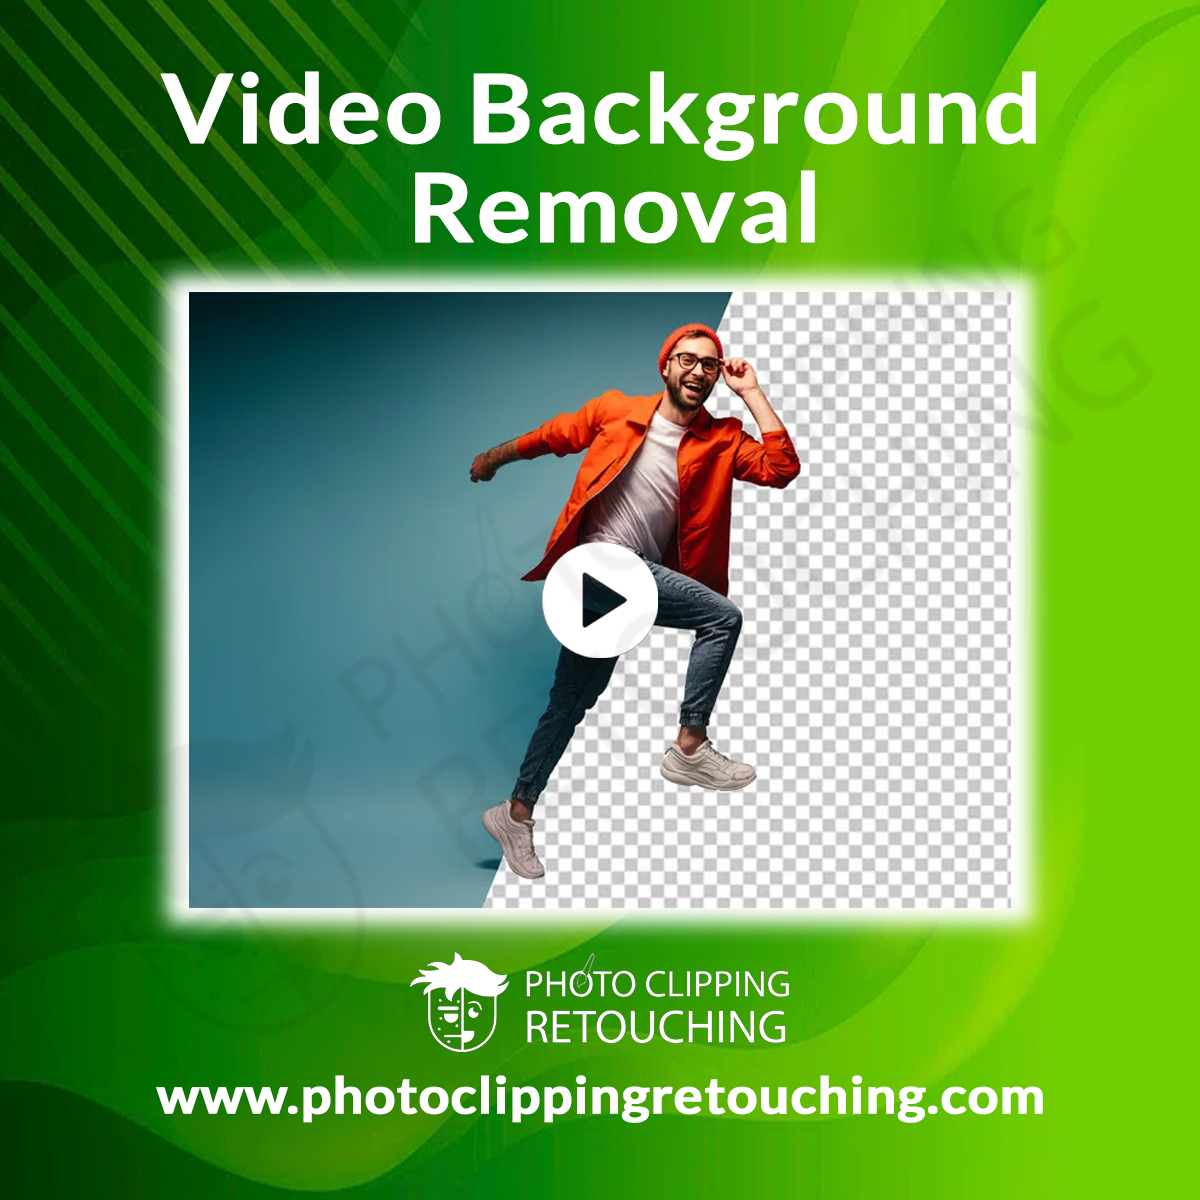 Craft immersive, boundary-breaking videos with our Background Removal Service. #BackgroundRemoval #ContentCreation #VideoServices #BoundlessCreativity #VideoEditing #EditingServices #GraphicDesign #PCRgraphics Email: info@photoclippingretouching.com Link: photoclippingretouching.com/video-backgrou…